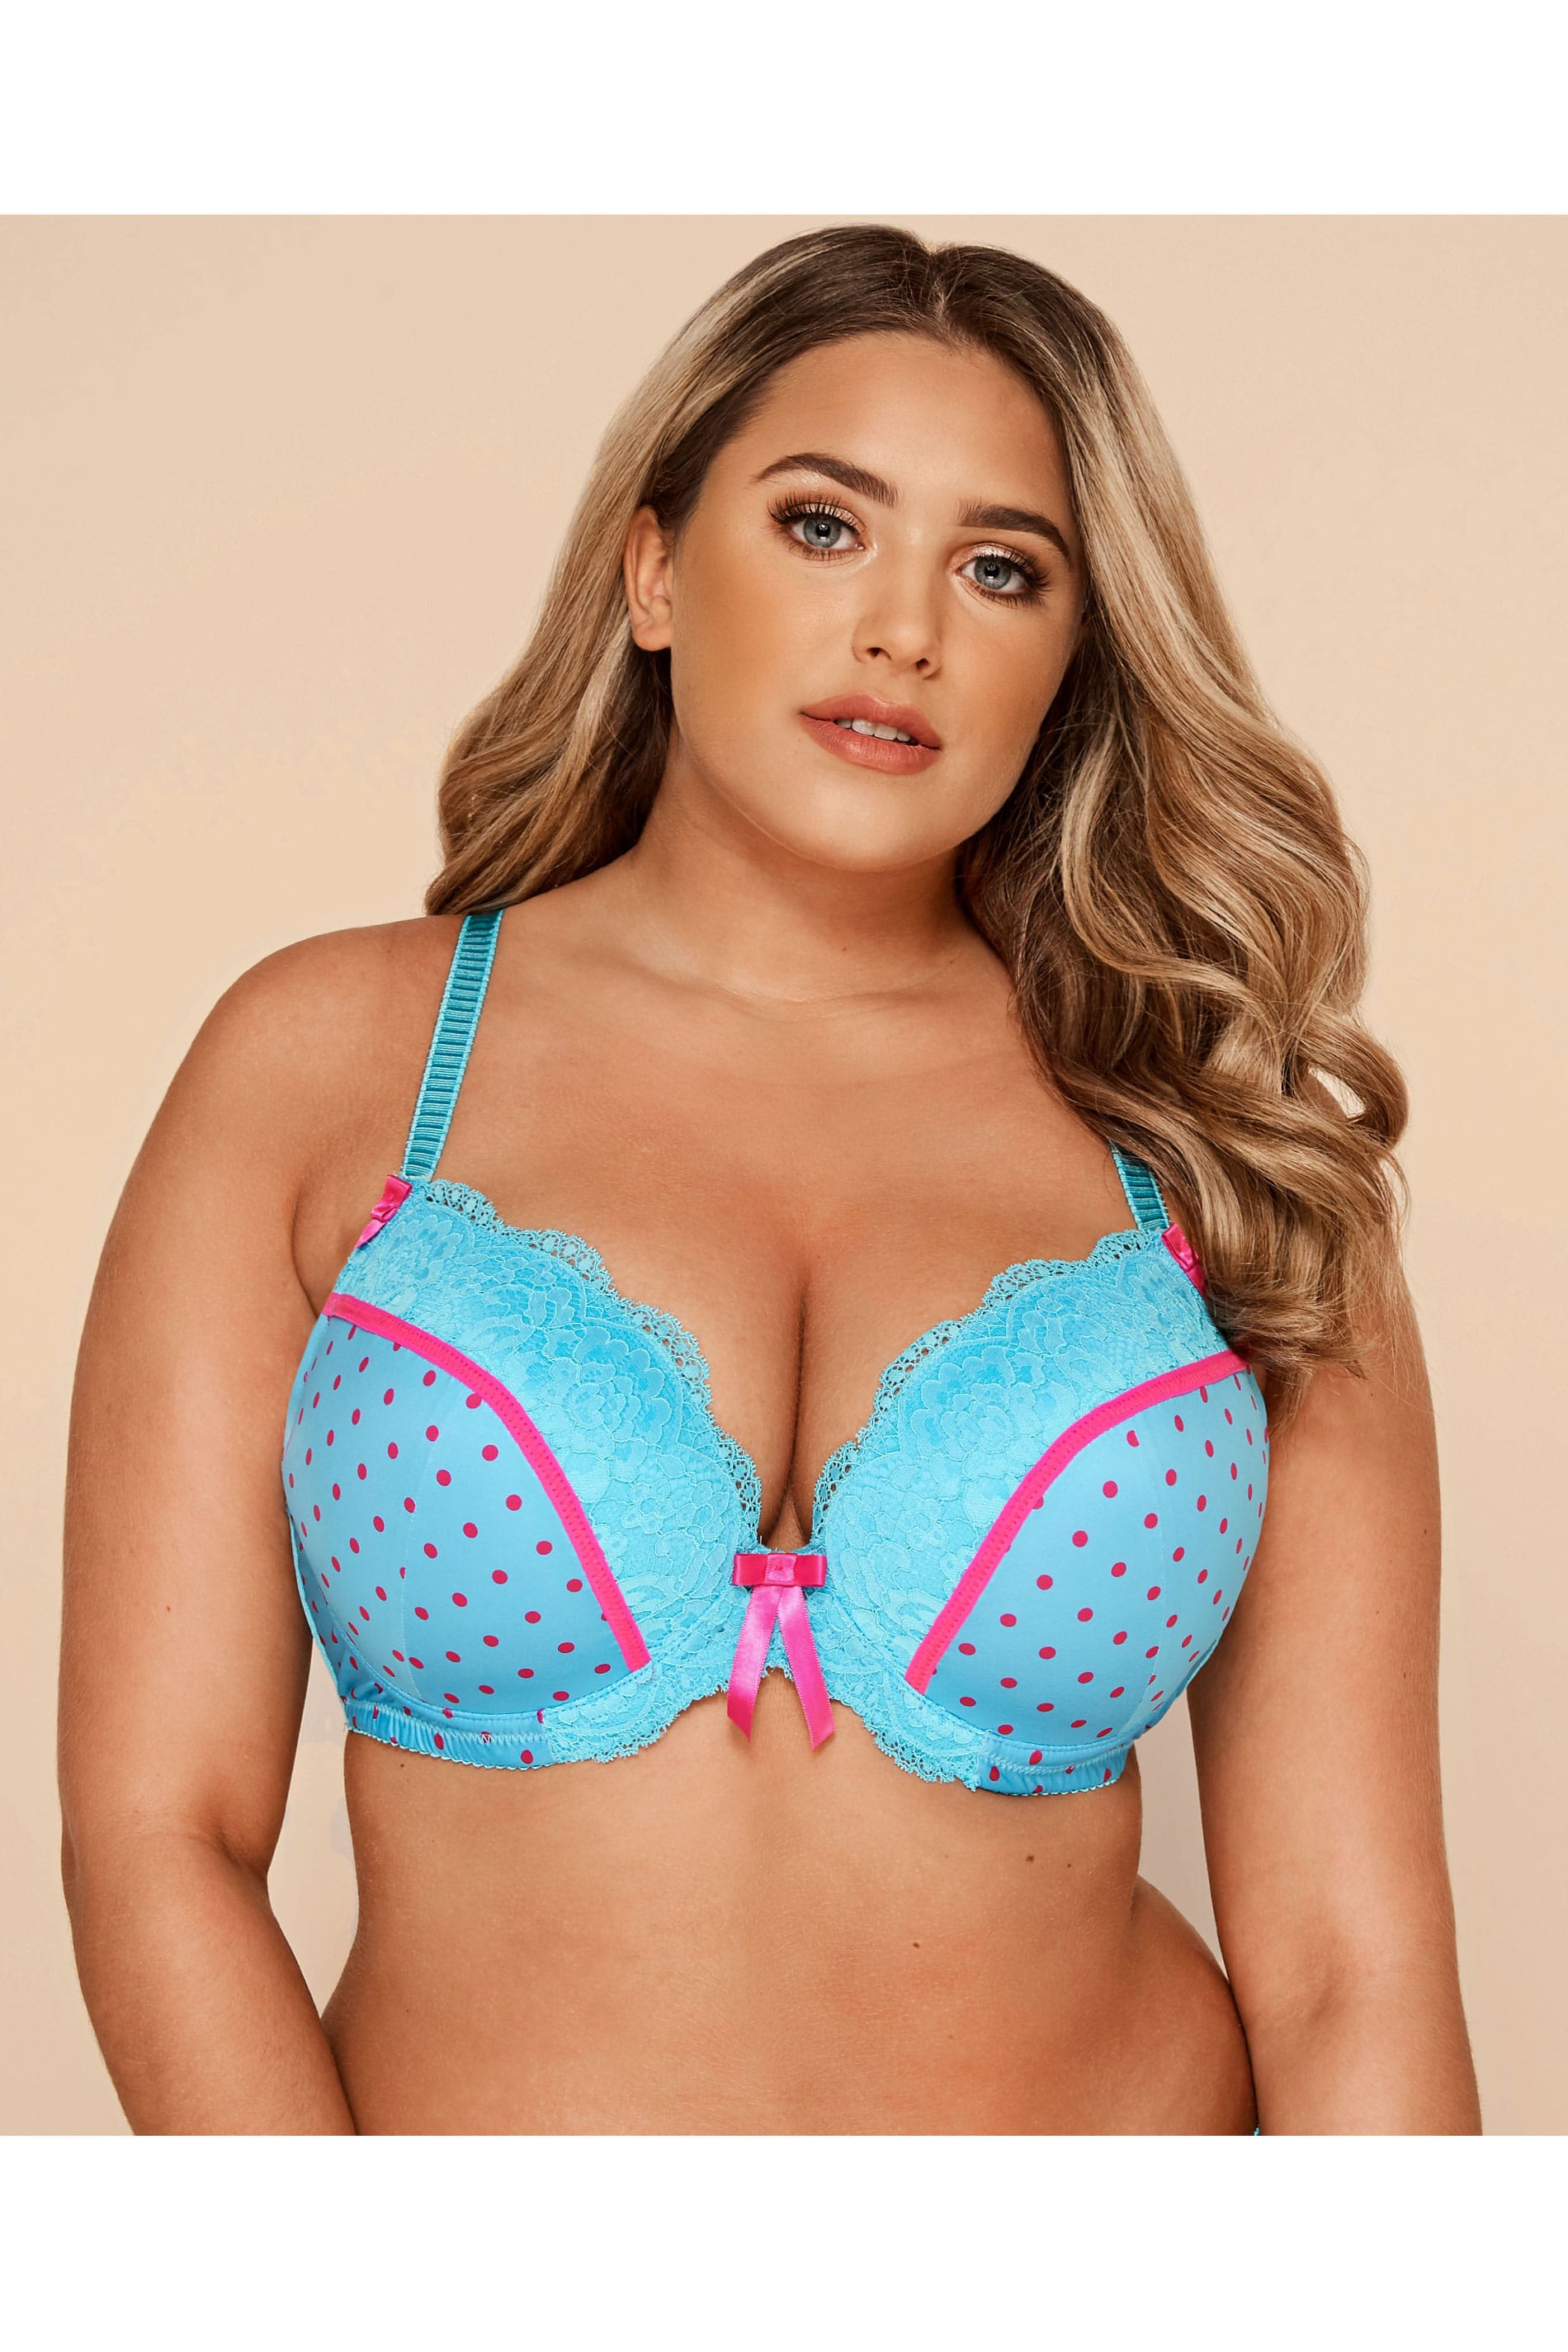 Blue And Pink Polka Dot Underwired Bra Yours Clothing